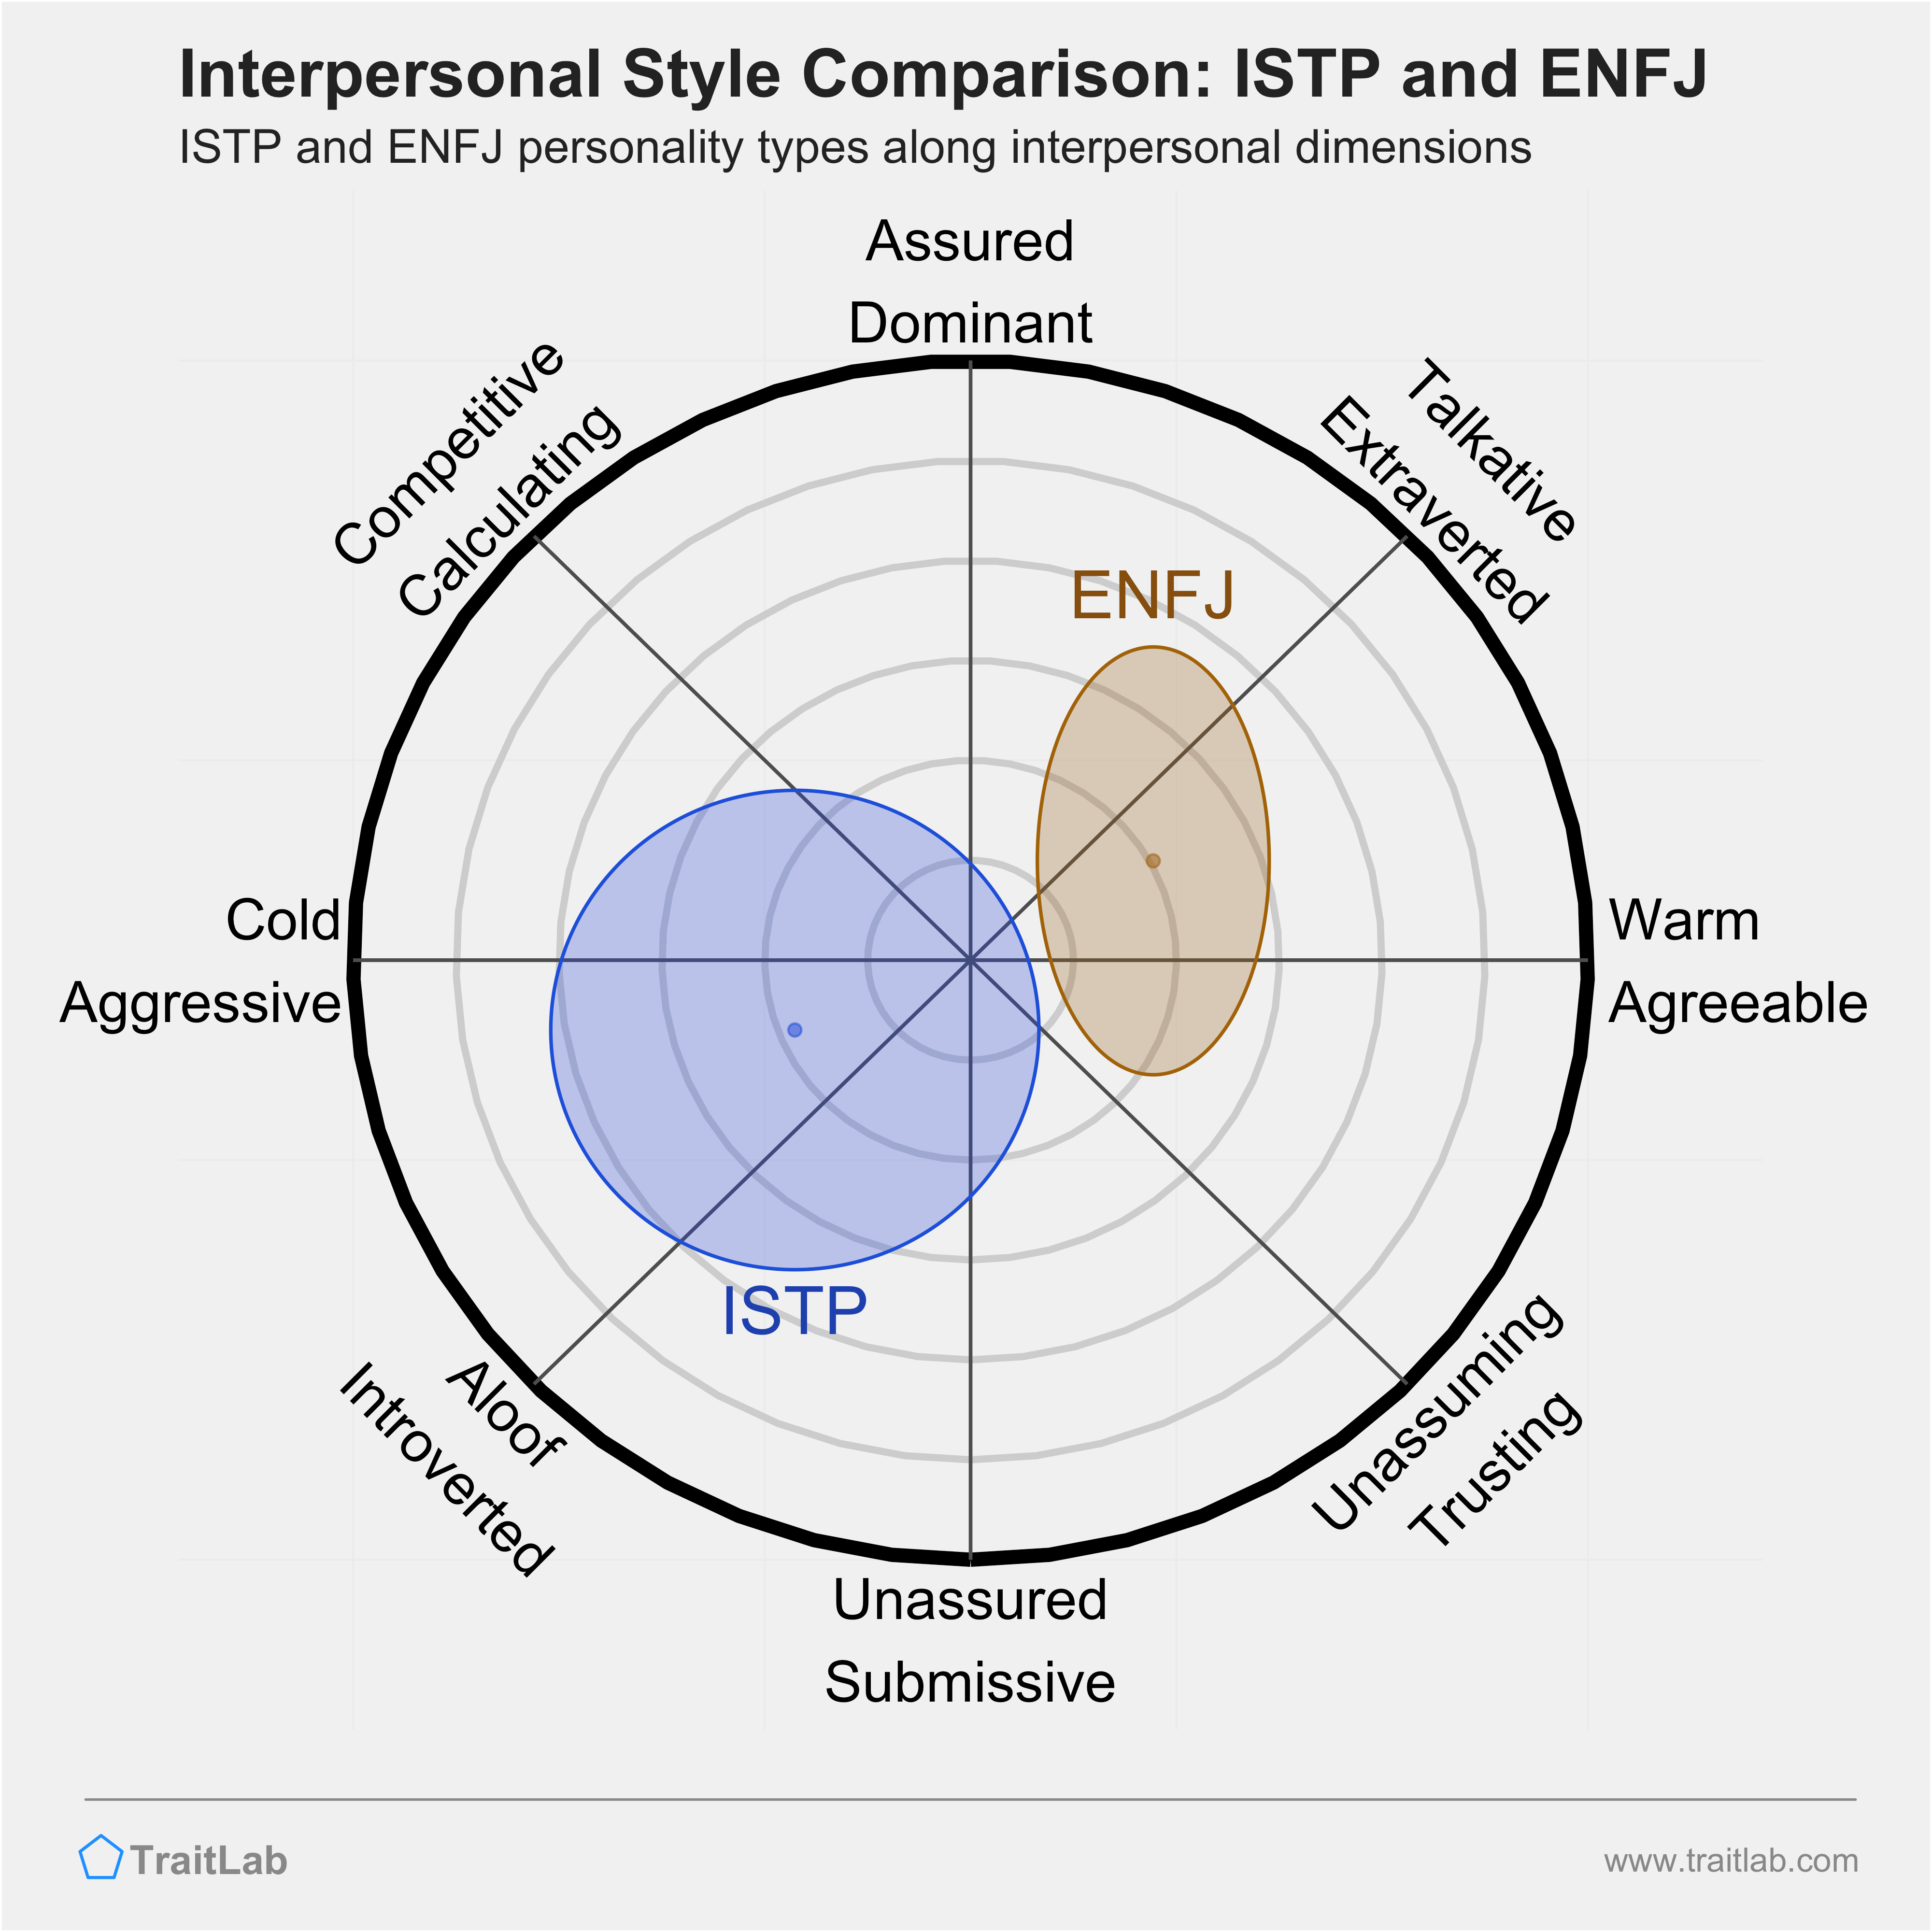 ISTP and ENFJ comparison across interpersonal dimensions